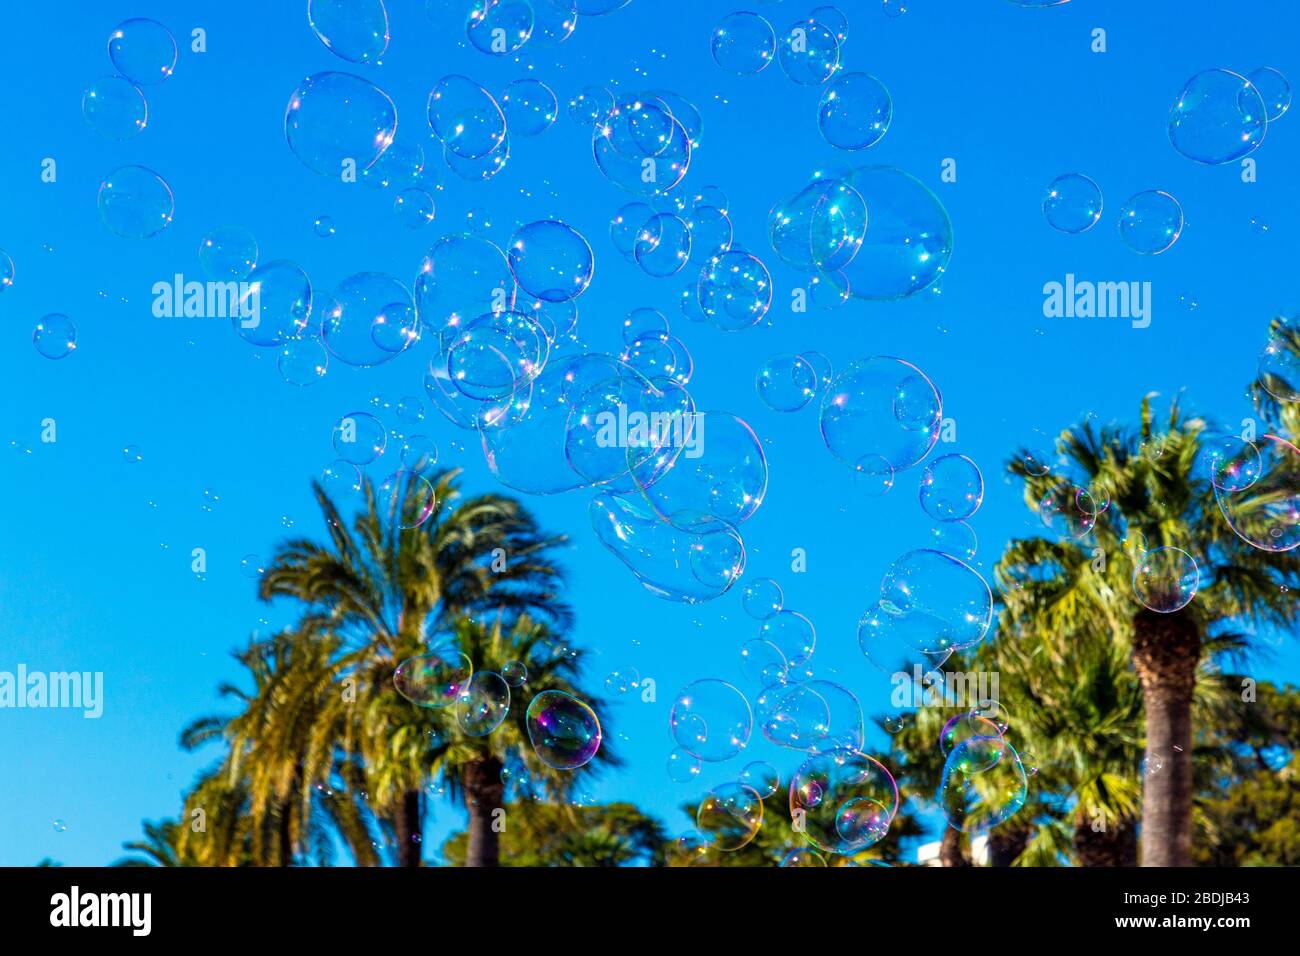 Soap bubbles against a blue sky and palm trees, Seville, Andalusia, Spain Stock Photo